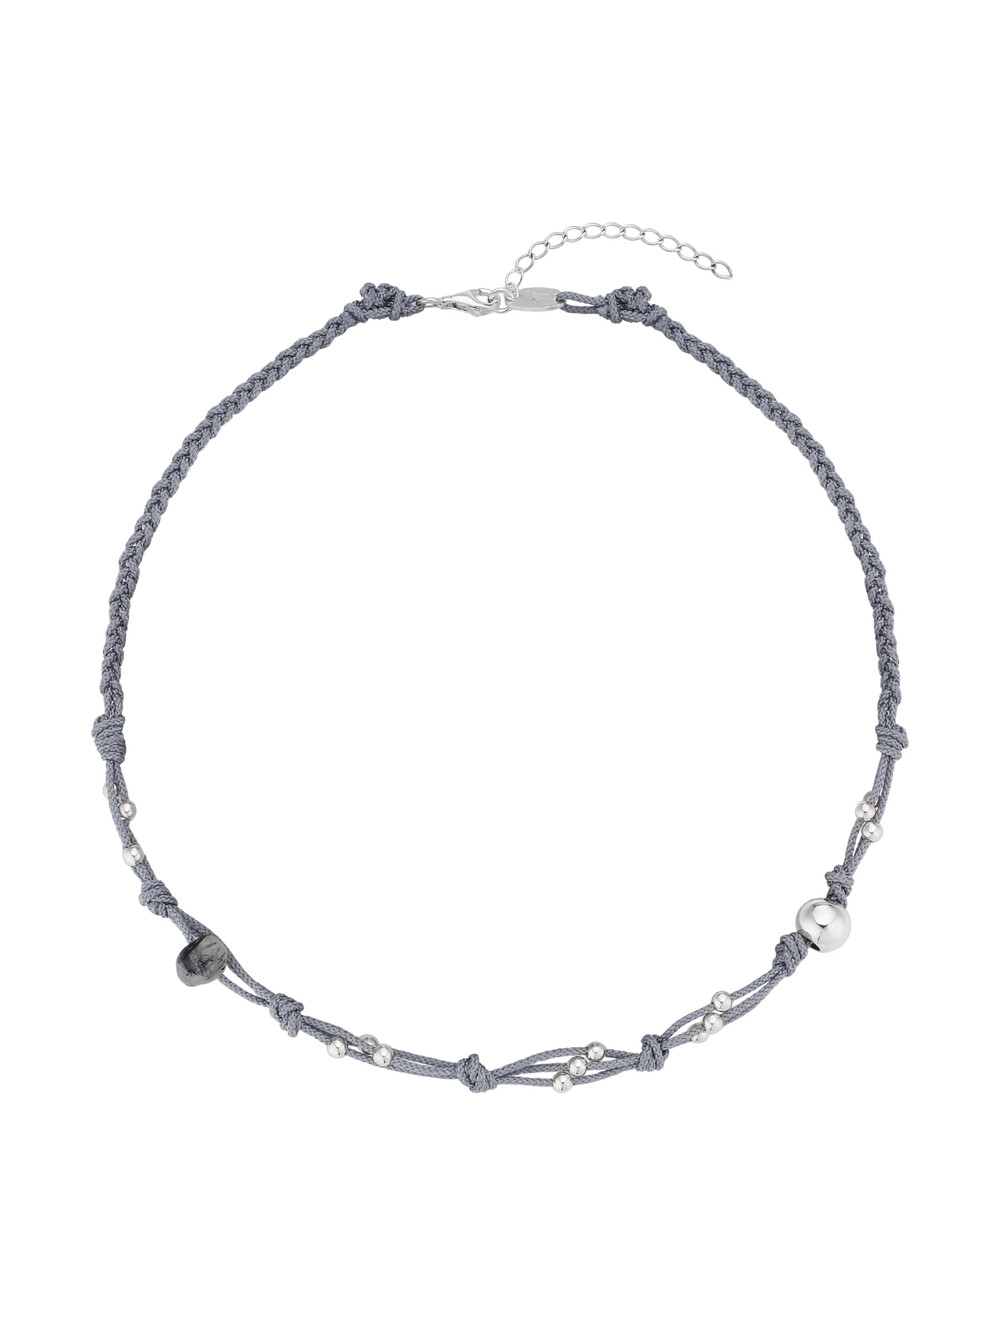 KNOT NECKLACE - GRAY